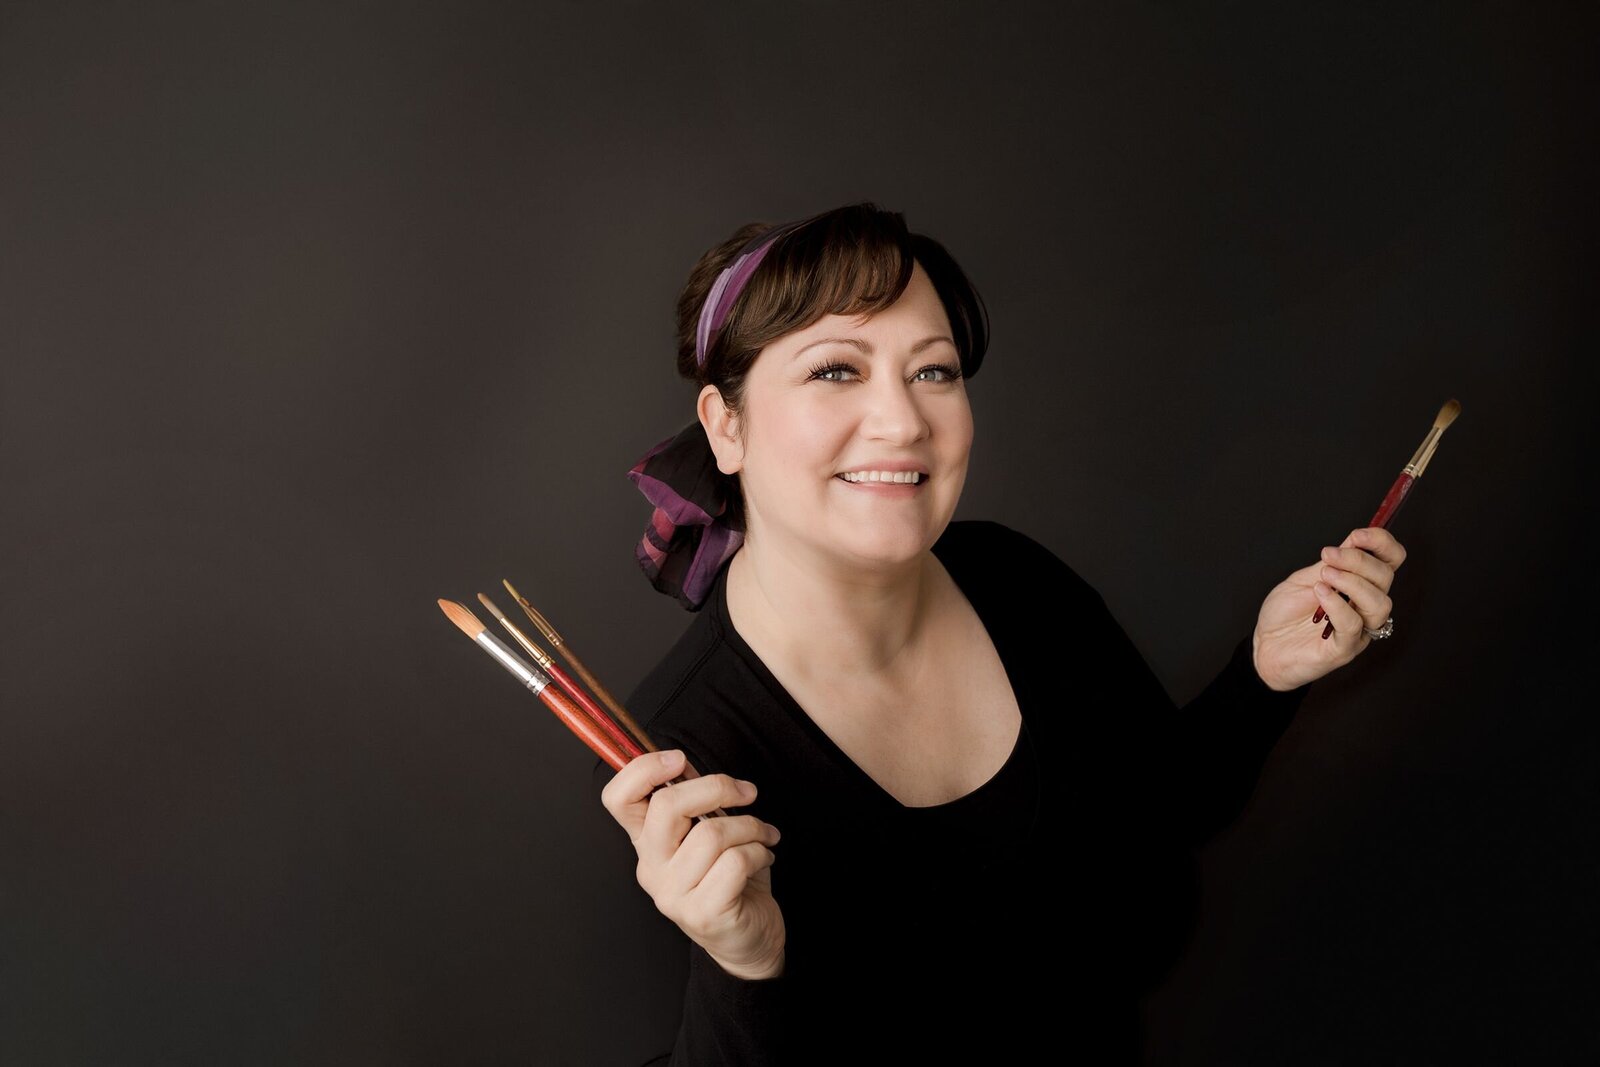 an artist holding brushes posing for a branding photo for her graphic design business